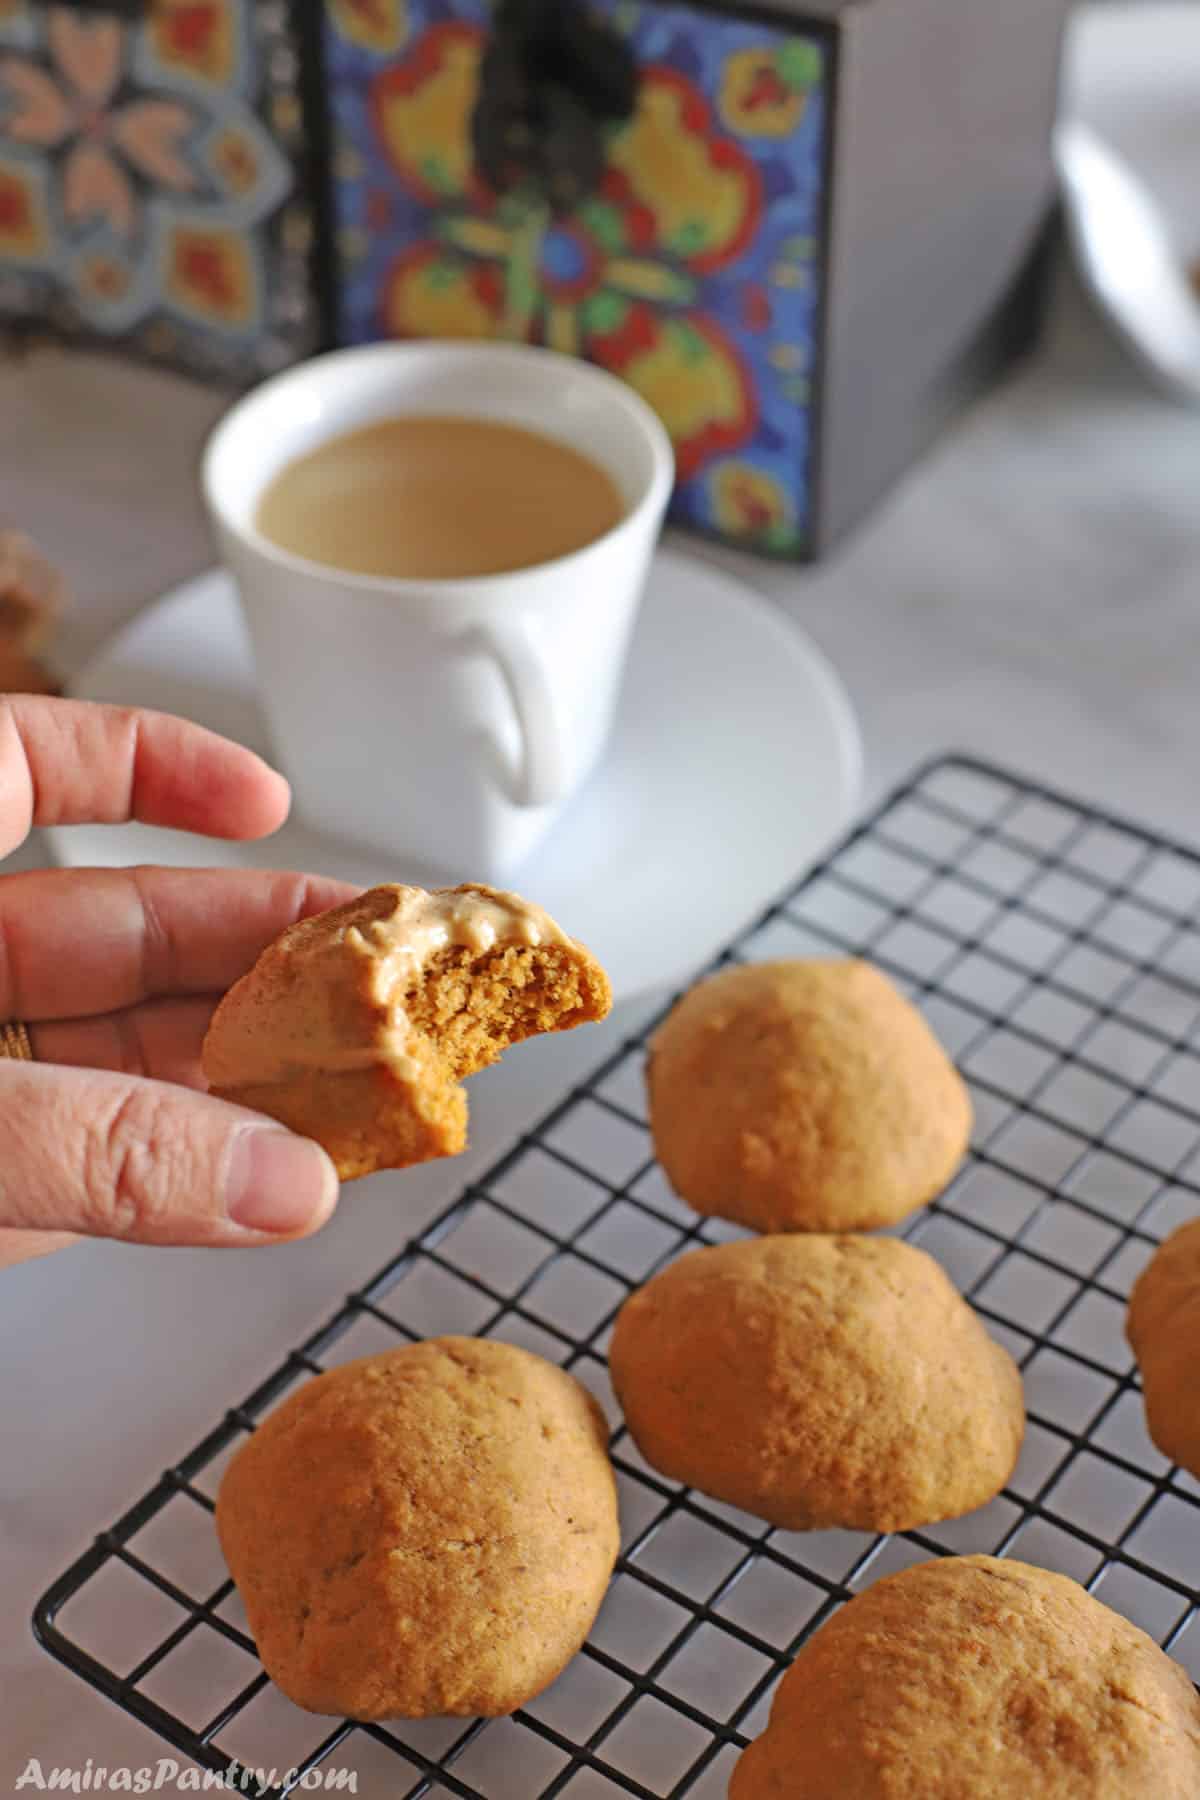 A hand holding one cookies with a bite taken from it.